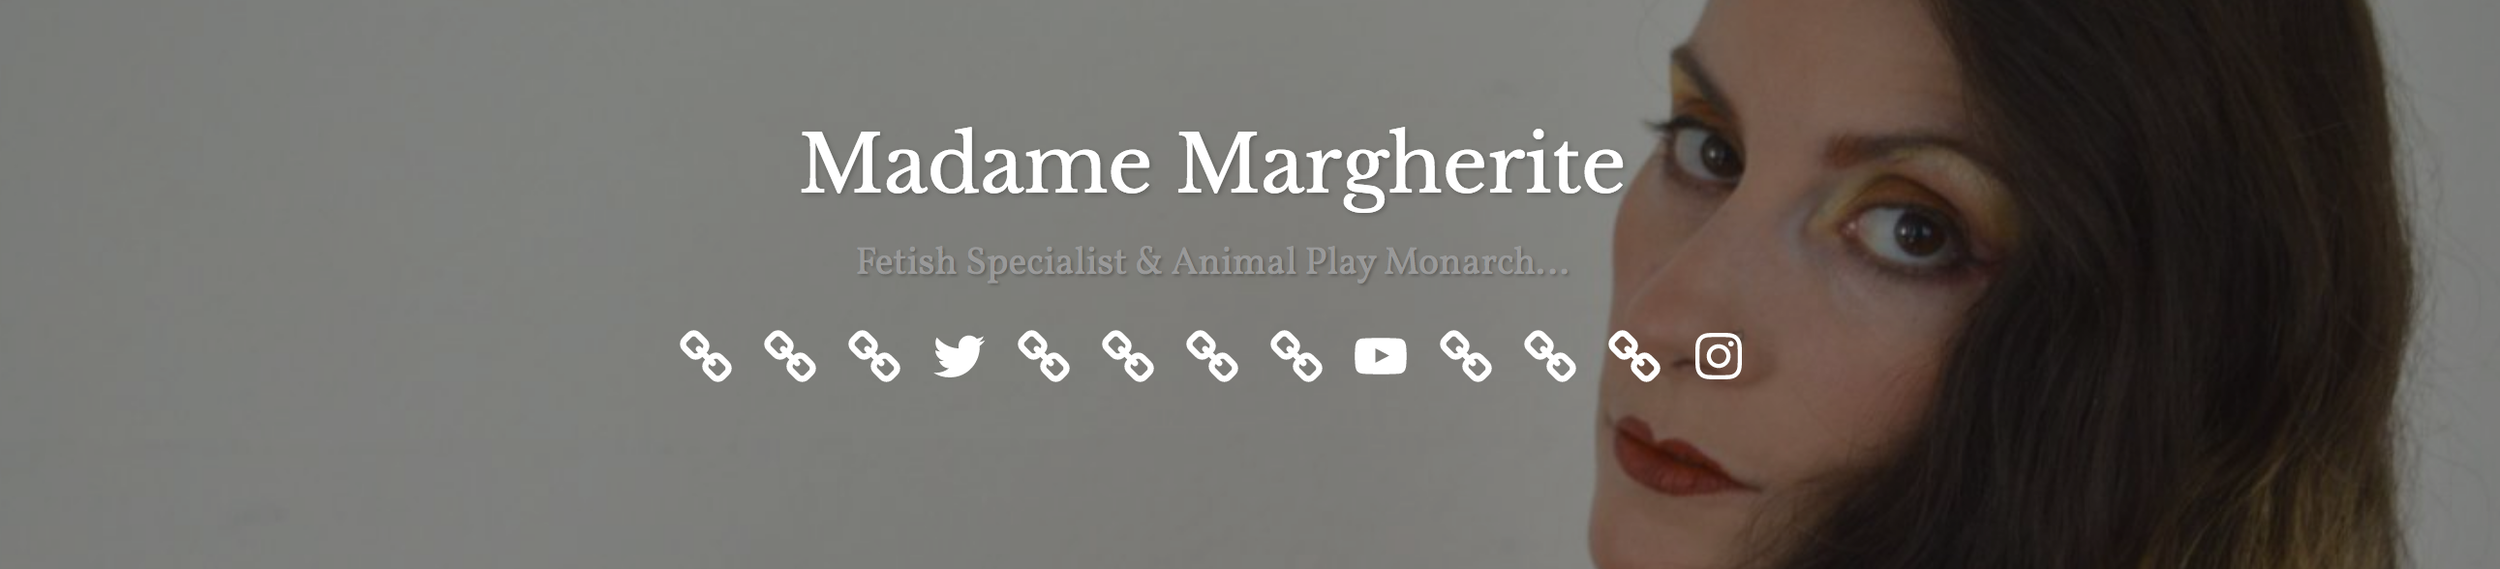 Madame Margherite Fetisch Specialist and Animal Play Monarch